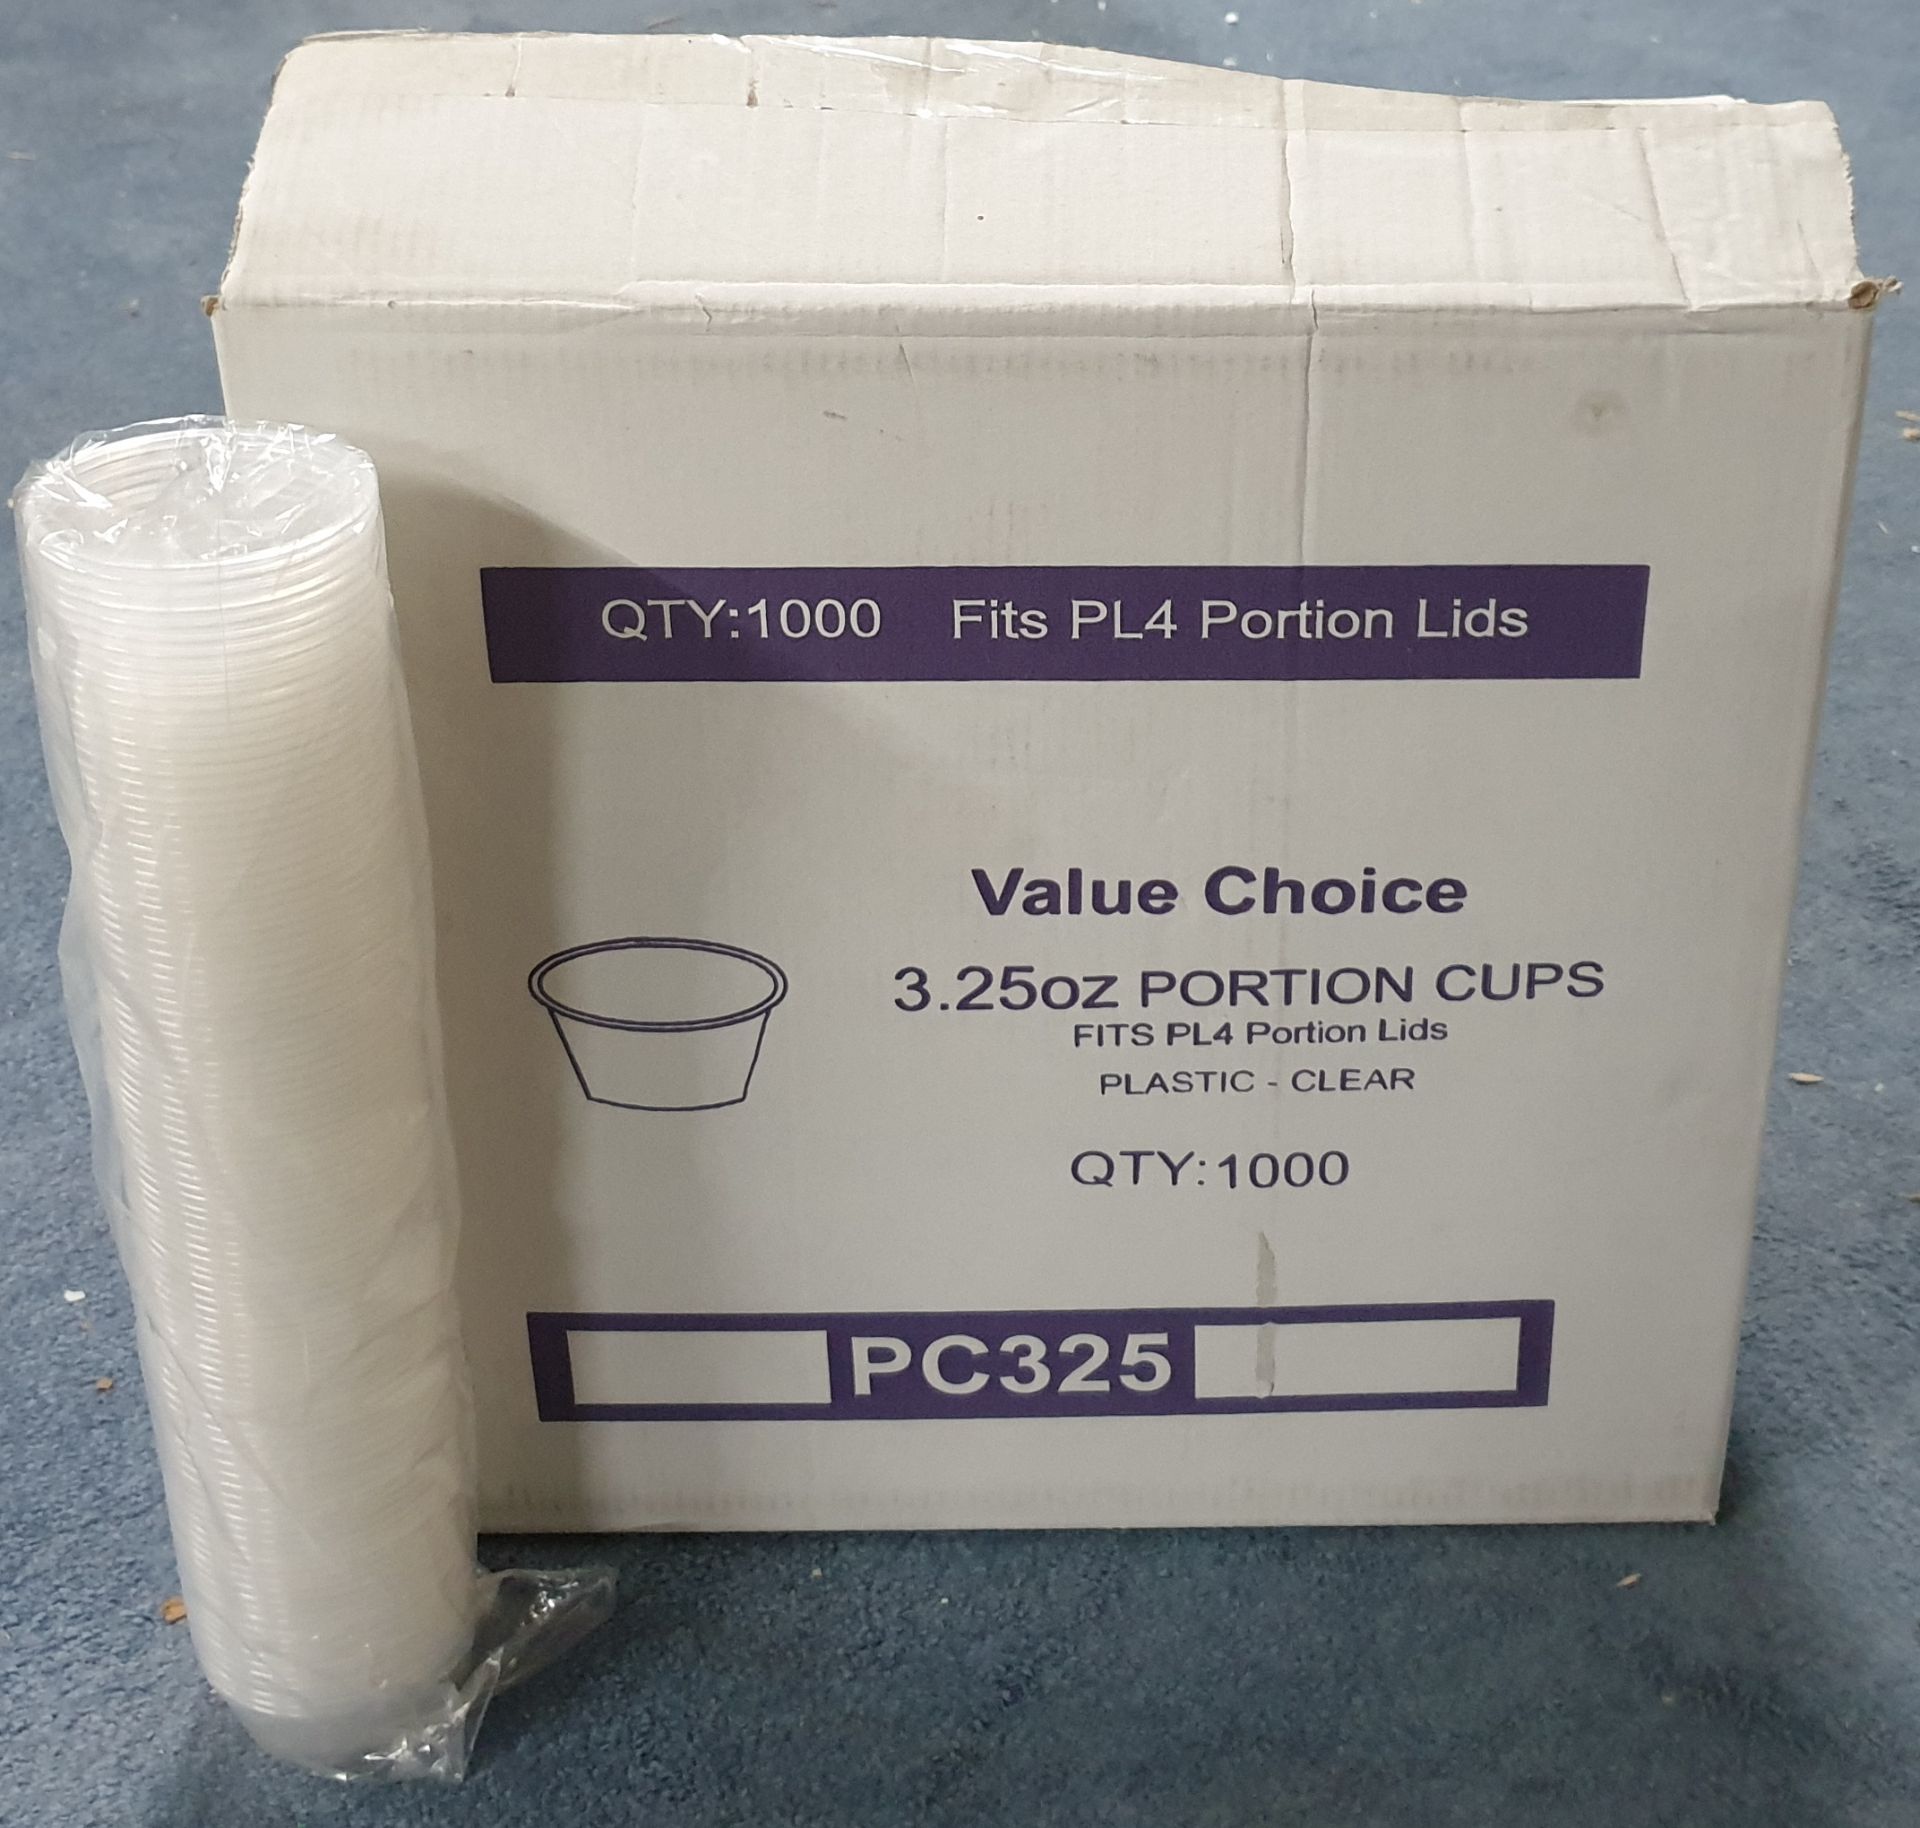 PALLET CONTAINING 74000 3.25OZ PORTION CUPS COLLECTION RADCLIFFE